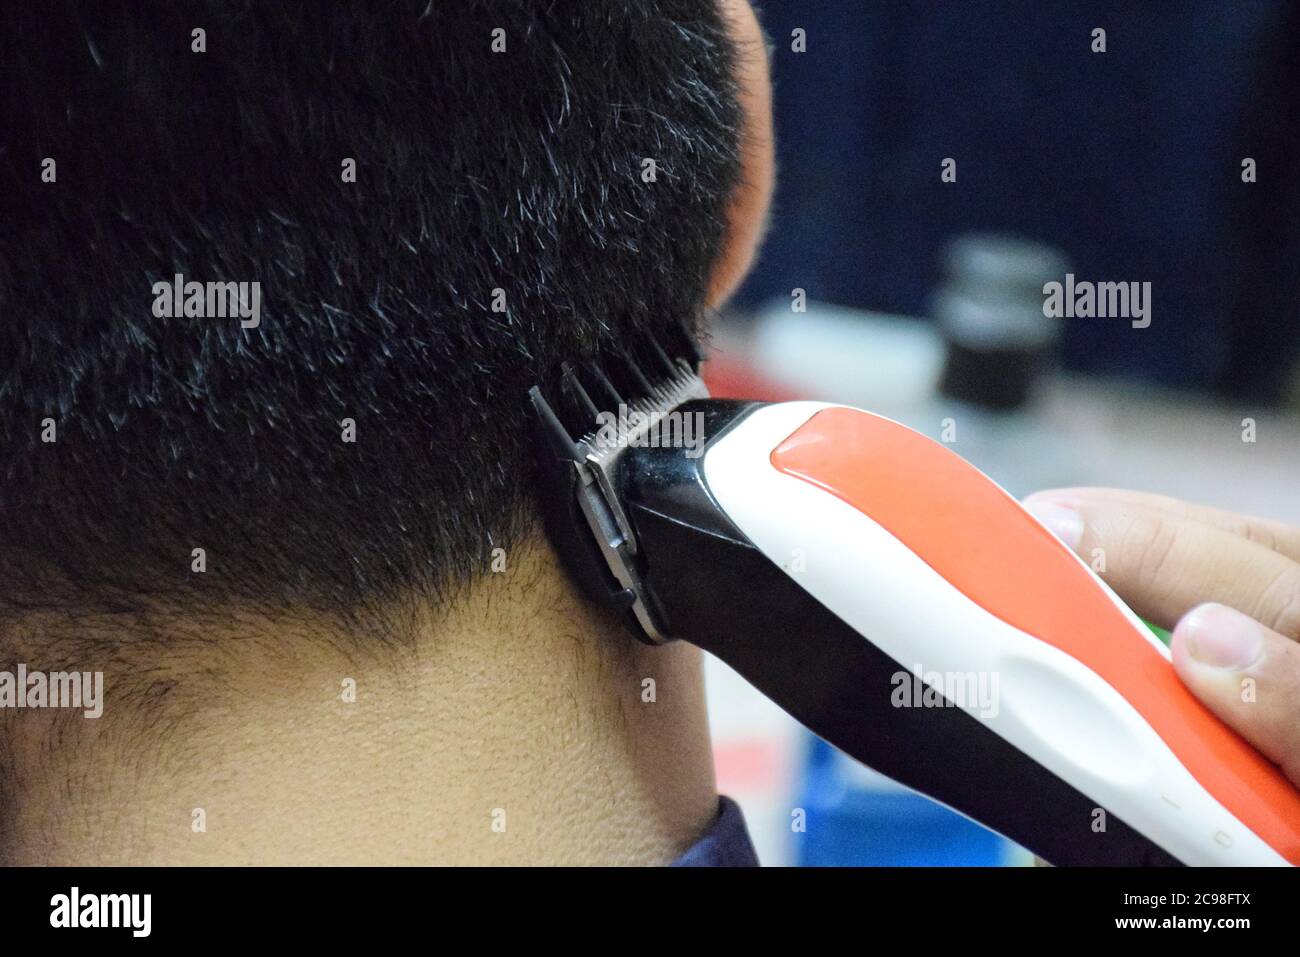 Soft Focus to Men's hairstyling and haircutting with hair clipper in a barber shop Stock Photo